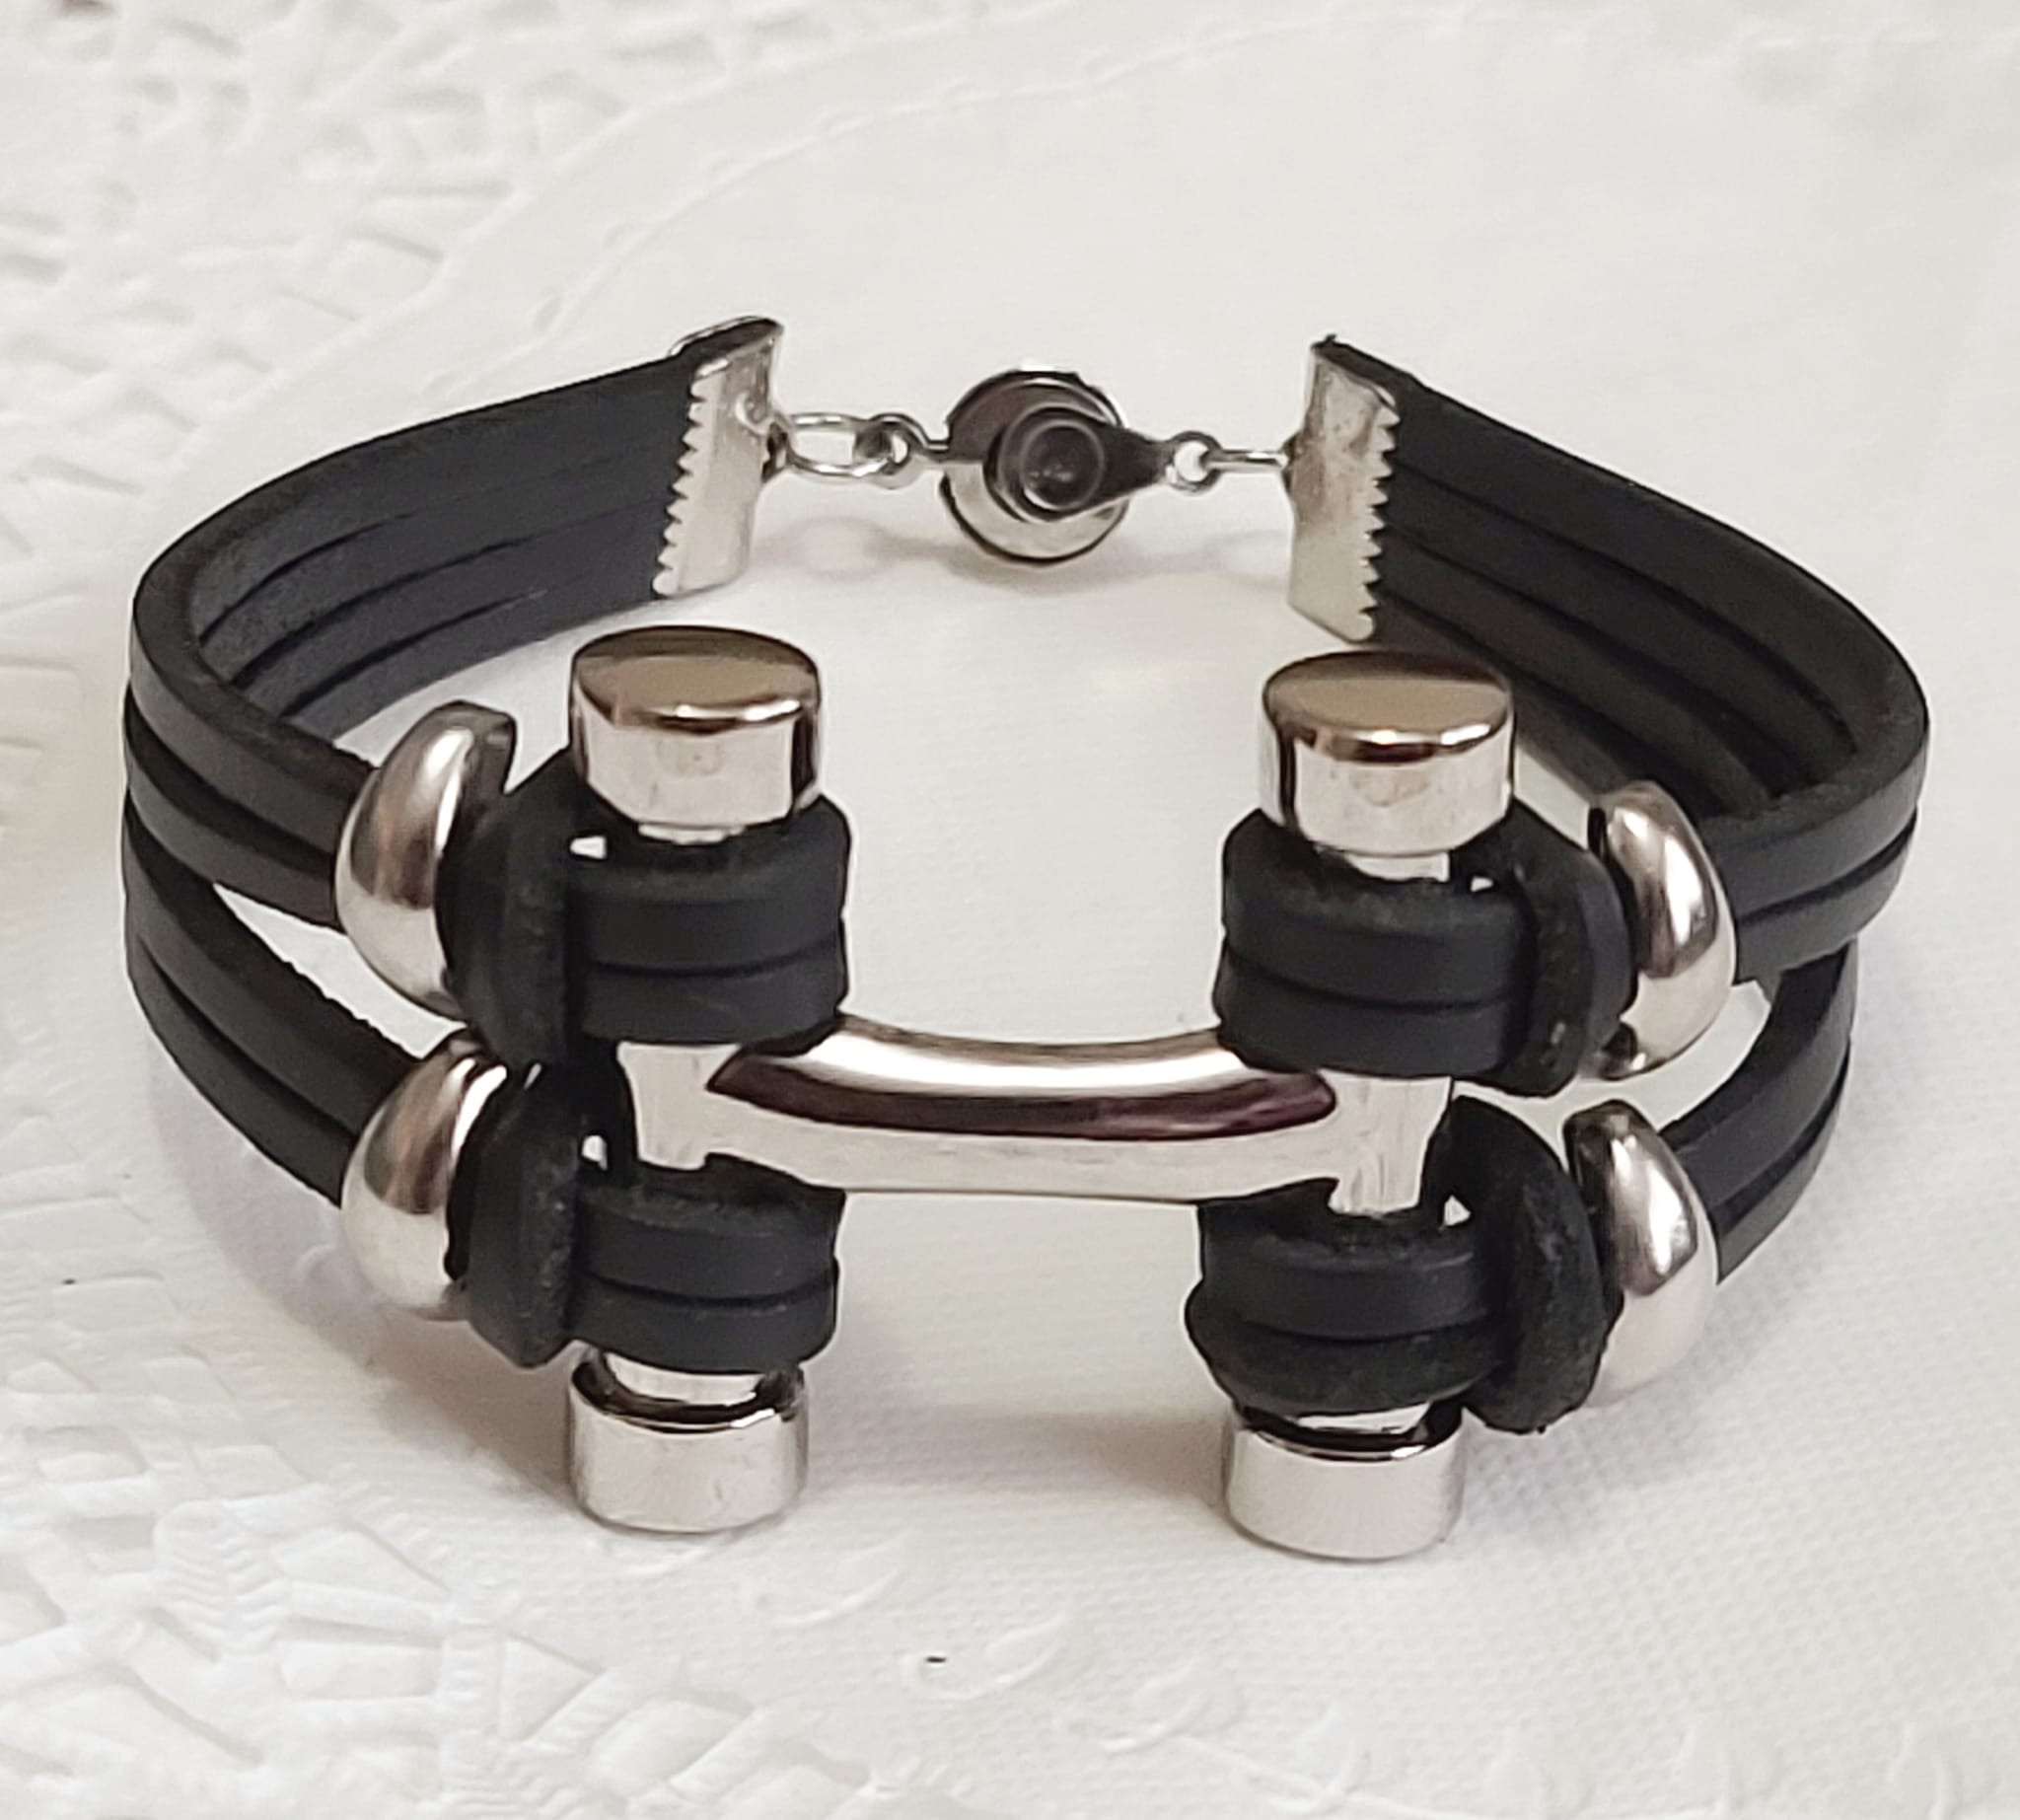 Black Leather and Stainless Steel Metal Bracelet 8.5"